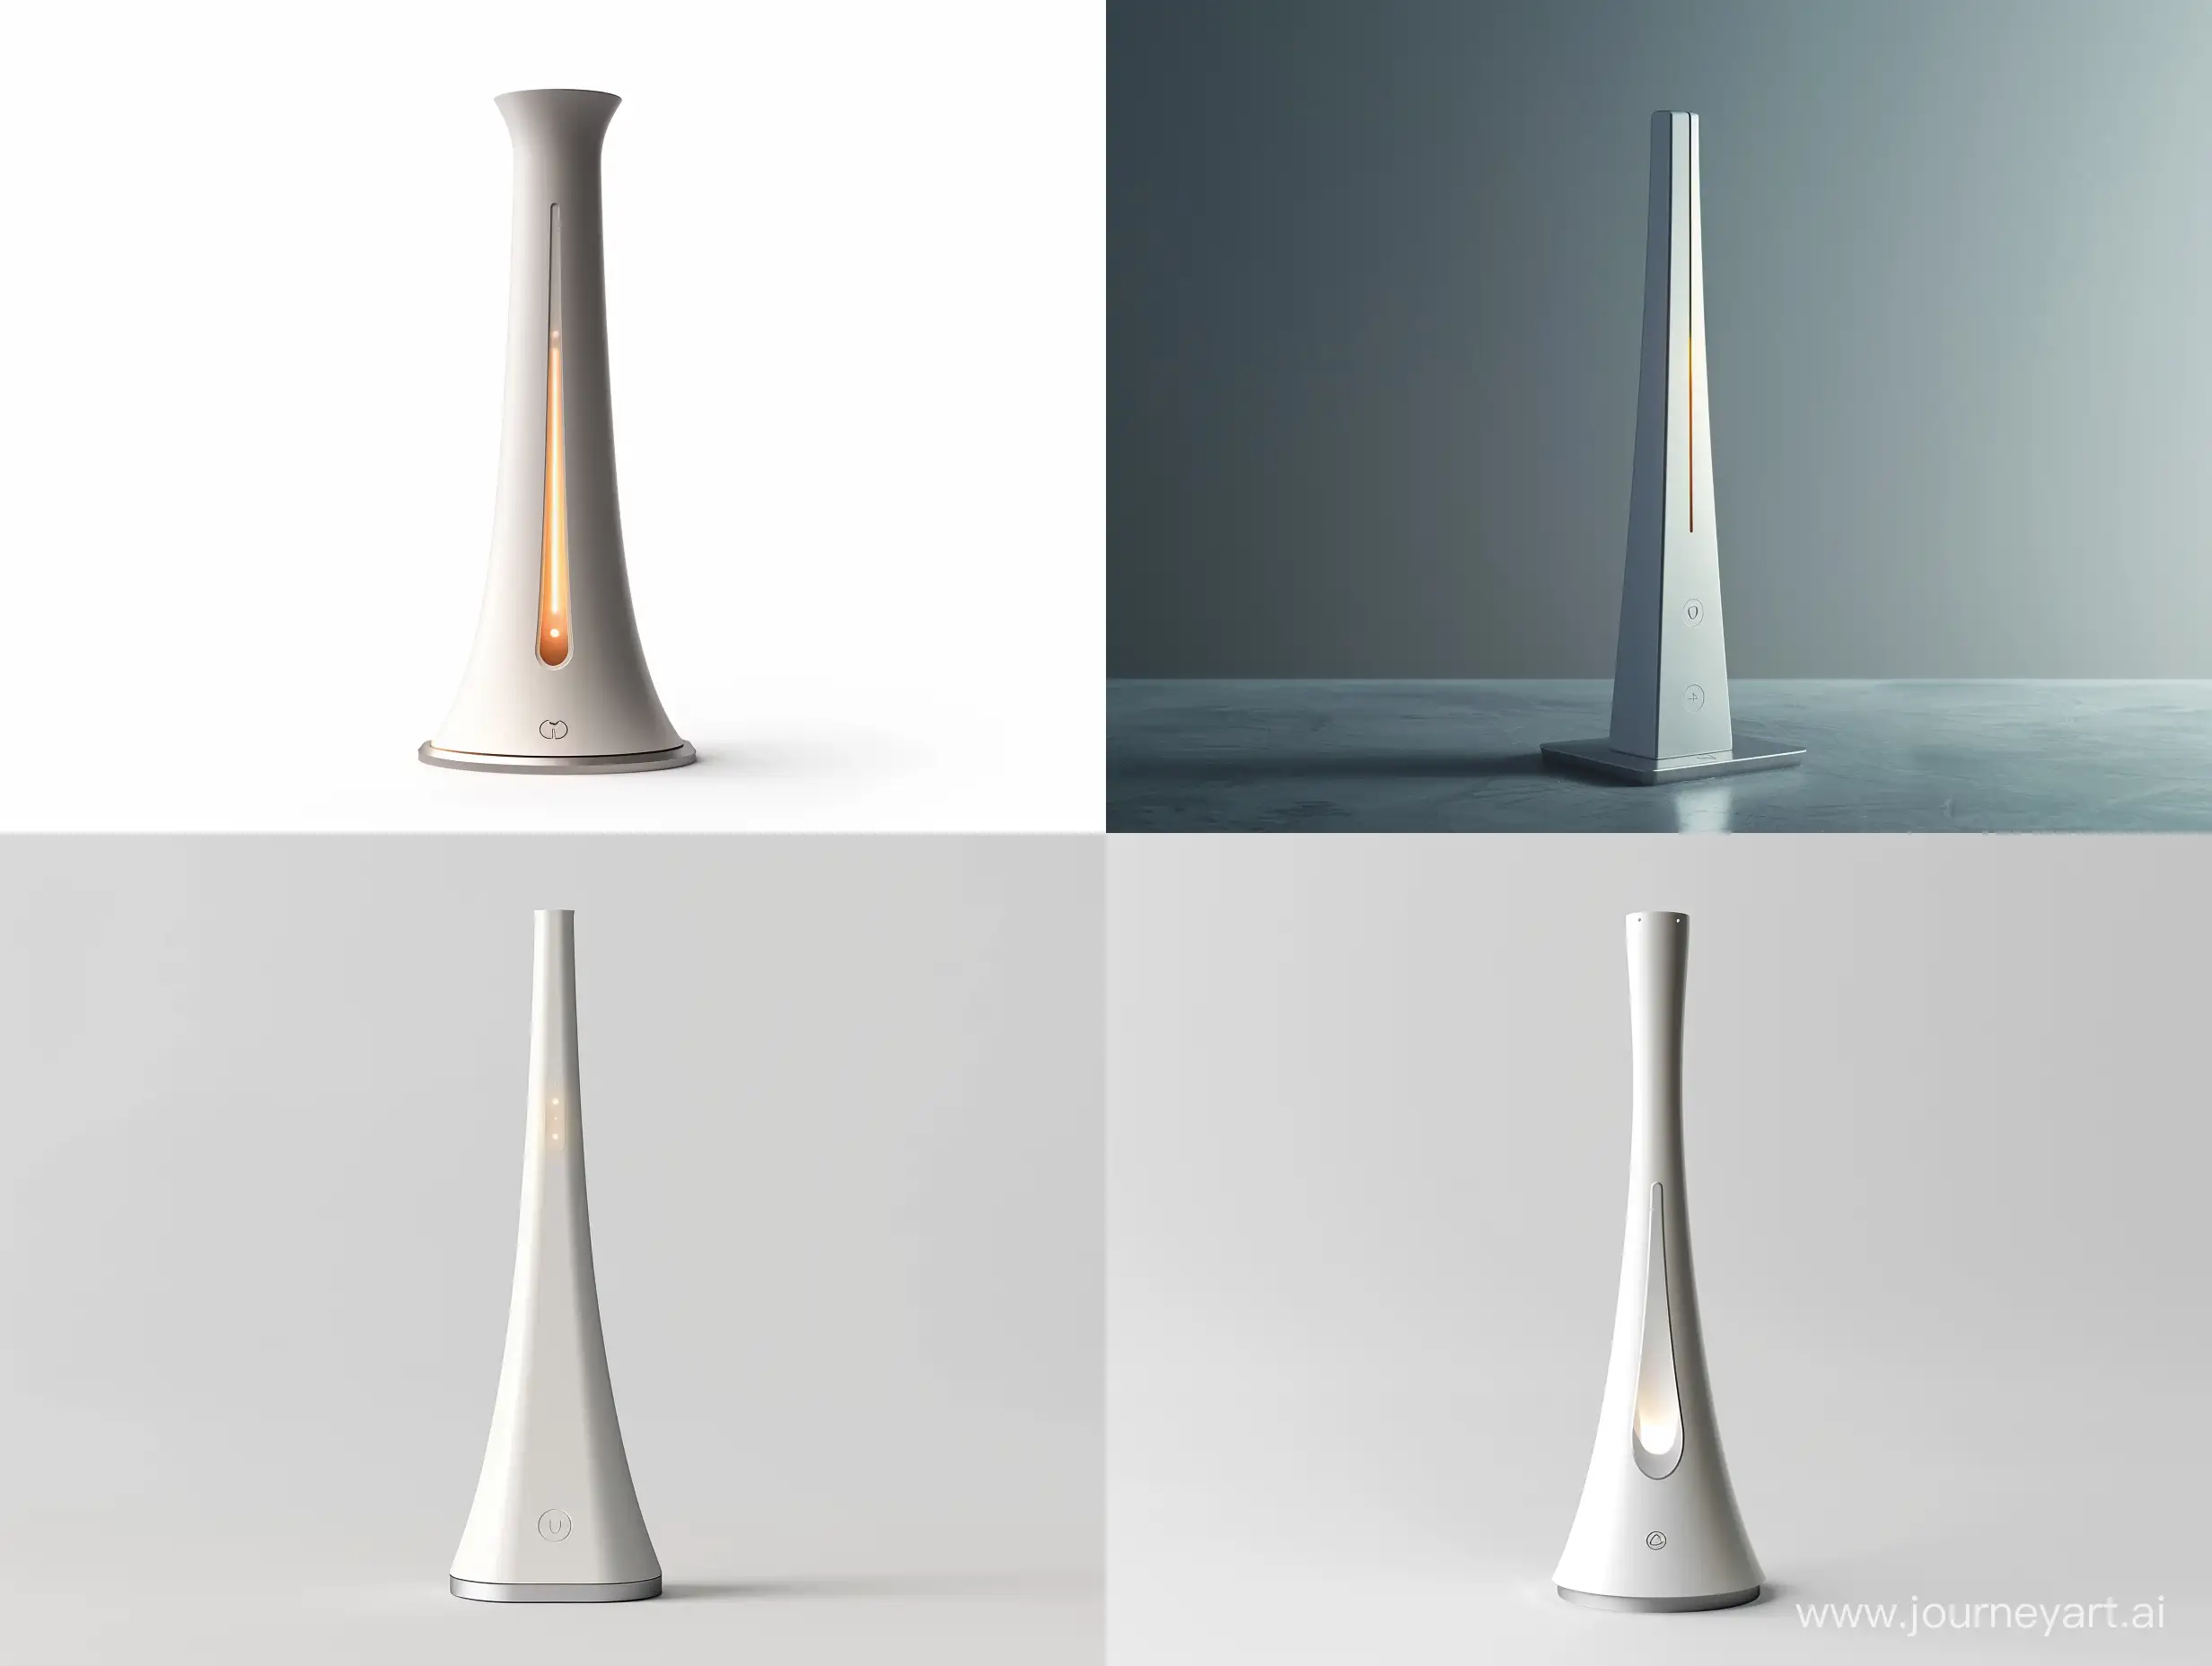 "Imagine  a slender, stand-alone energy gateway with a slight taper towards the top, inspired by Japanese minimalism. The base is made of sustainable aluminium, while the body is constructed from recycled plastics, finished in white or light gray. Standing 30 cm tall with a base diameter of 8 cm, this device features soft LED lighting for notifications and a laser-engraved logo on the aluminium base. It serves as a central hub for smart home devices, simplifying energy management with a touch of Zen-inspired elegance, blending seamlessly into eco-conscious homes."realistic style